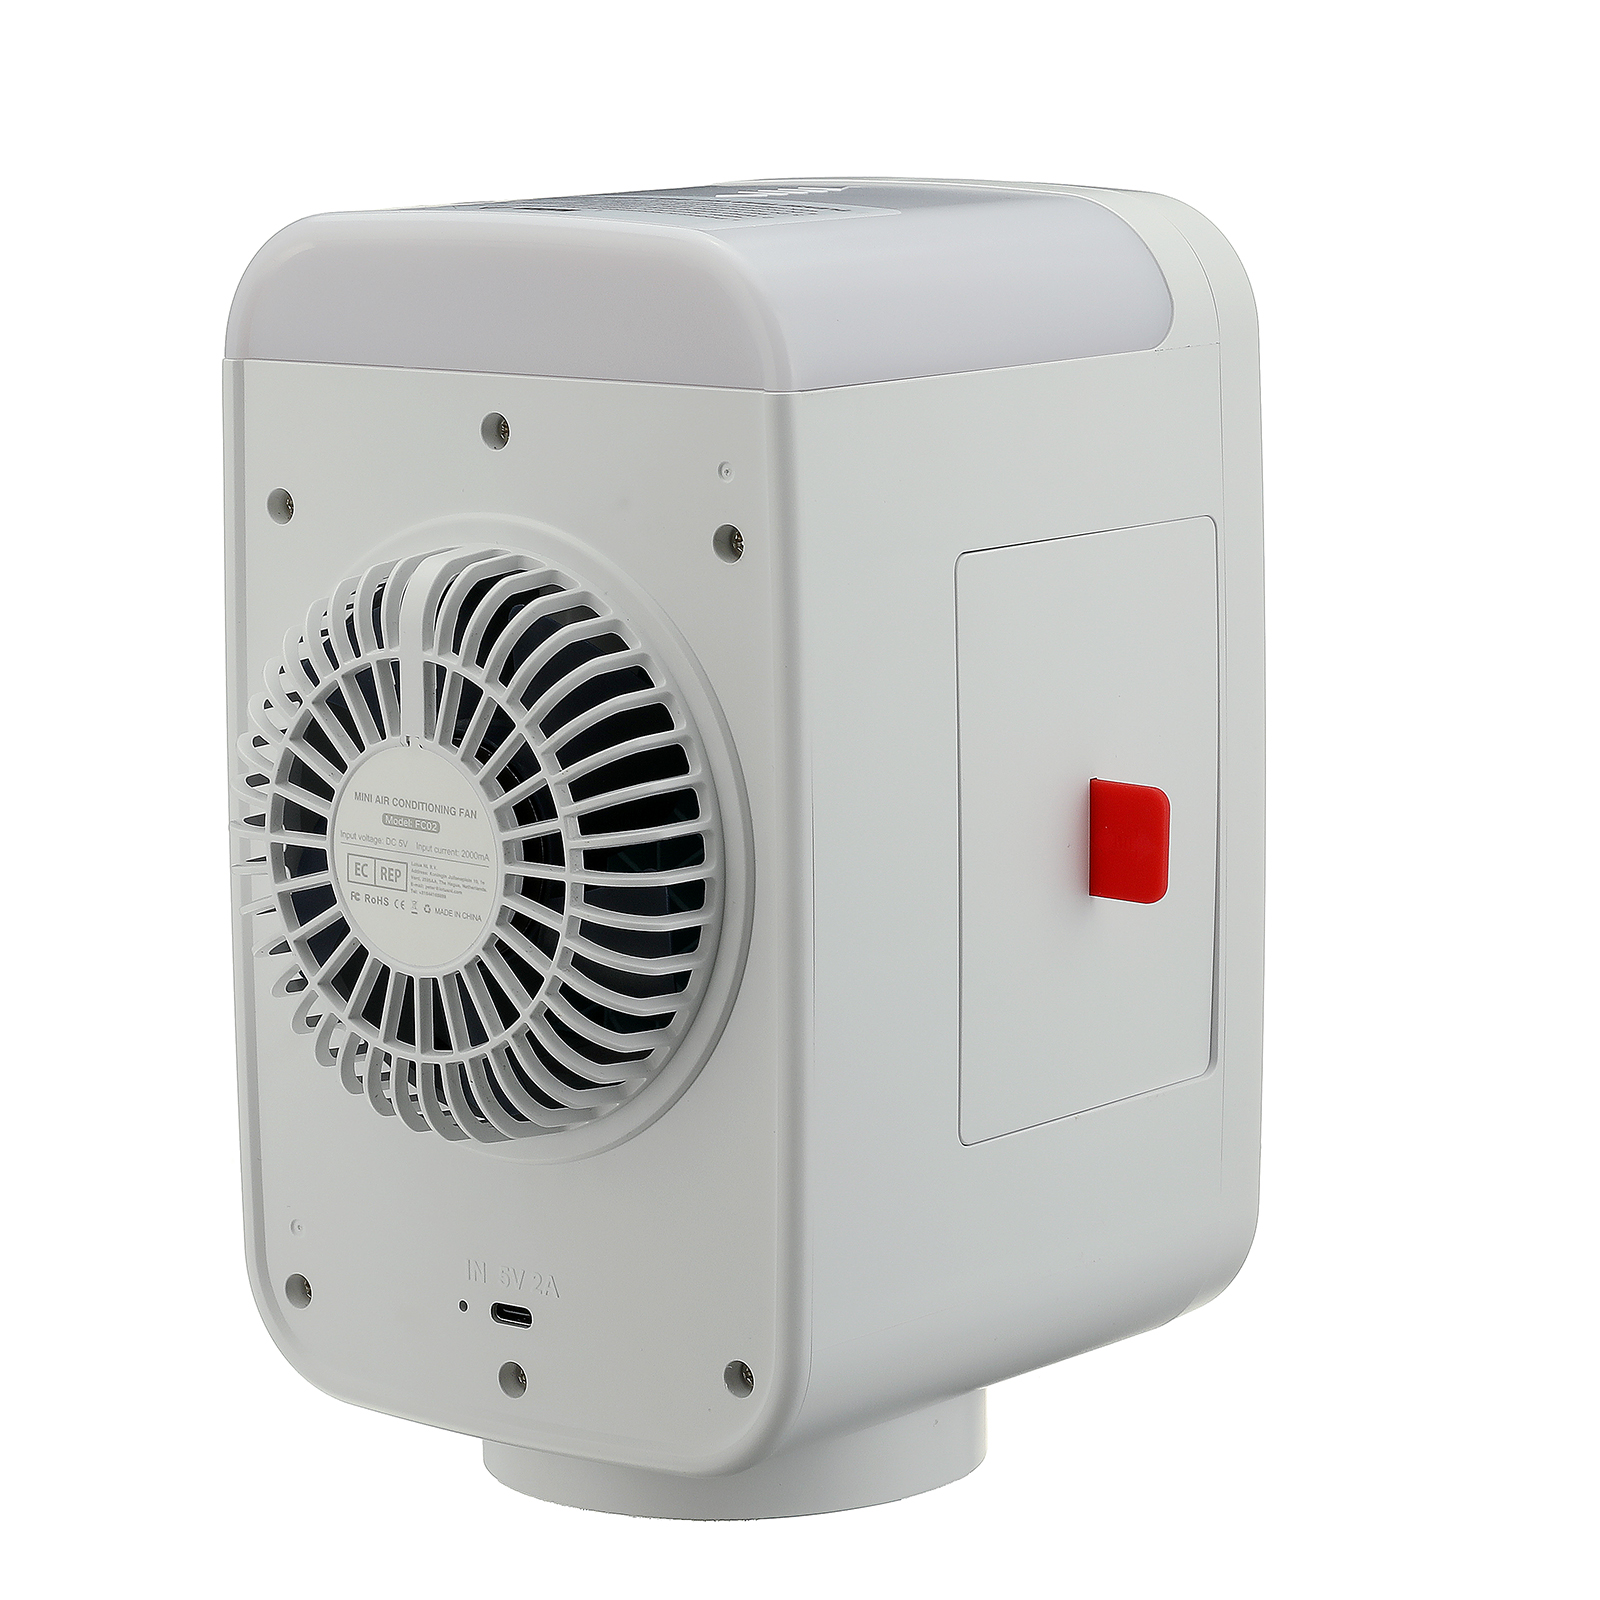 5-in-1-Mini-Air-Cooler-3-Wind-Speed-Adjustment-120deg-Wide-Angle-Rotation-Air-Humidification-Conditi-1885105-24